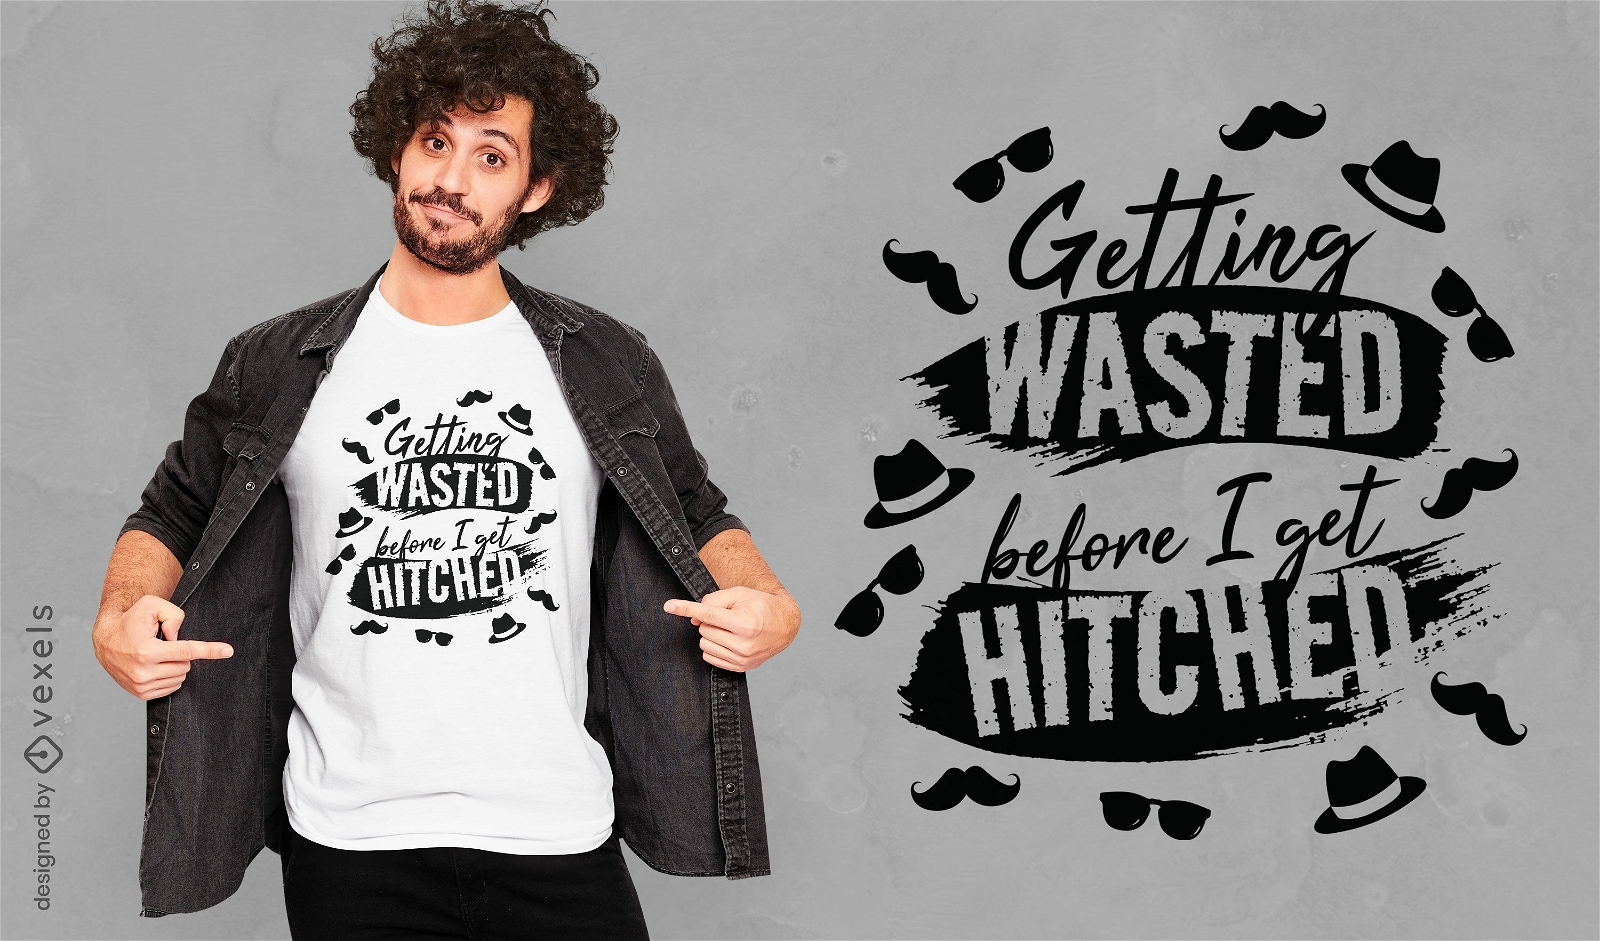 Funny wasted quote t-shirt design